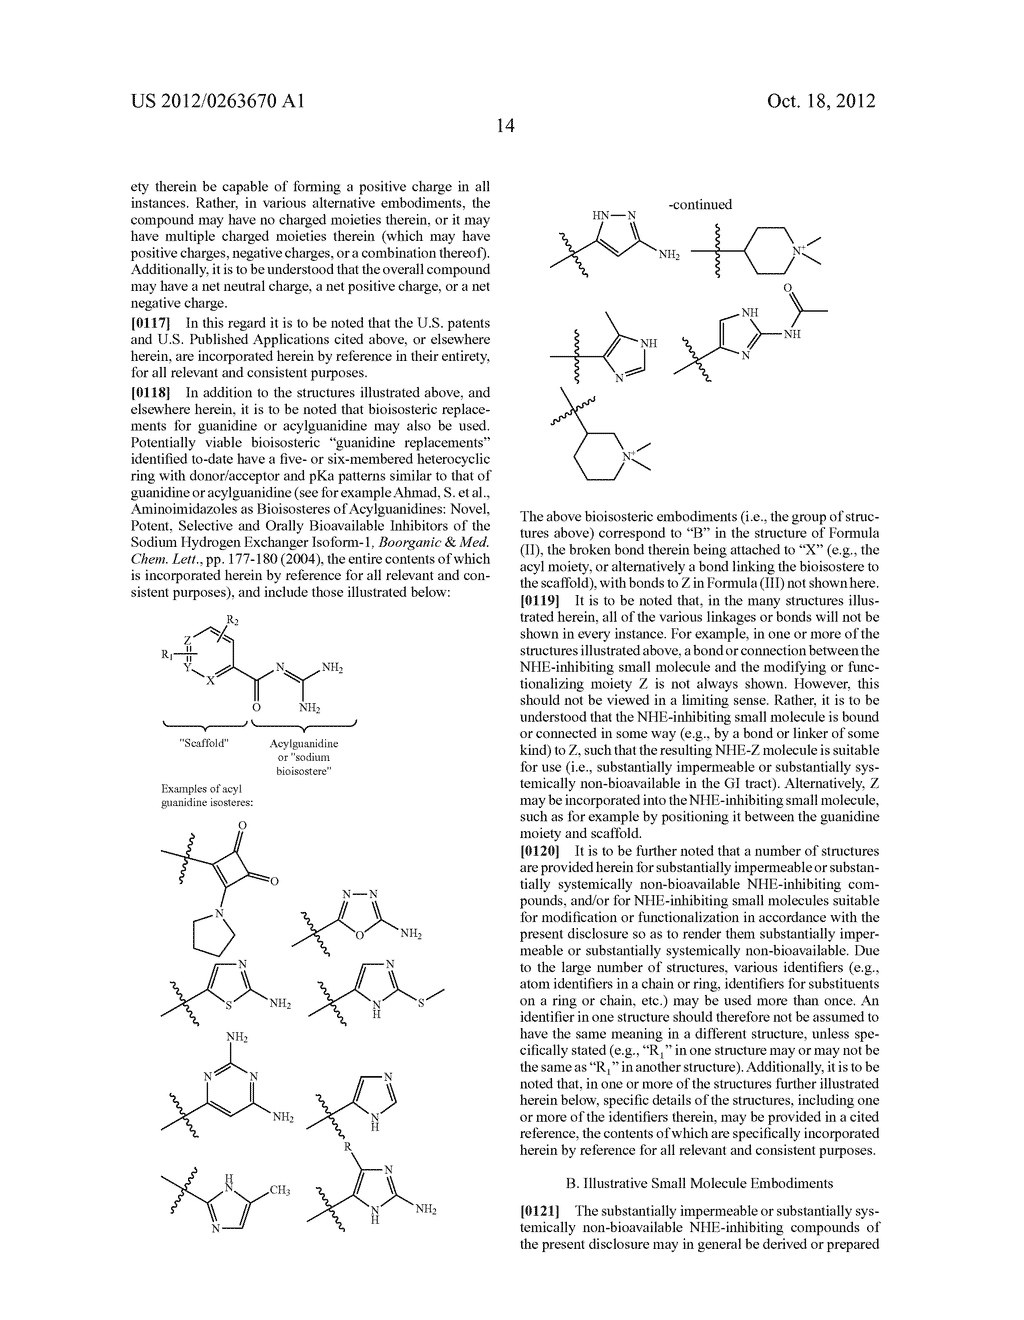 COMPOUNDS AND METHODS FOR INHIBITING NHE-MEDIATED ANTIPORT IN THE     TREATMENT OF DISORDERS ASSOCIATED WITH FLUID RETENTION OR SALT OVERLOAD     AND GASTROINTESTINAL TRACT DISORDERS - diagram, schematic, and image 22